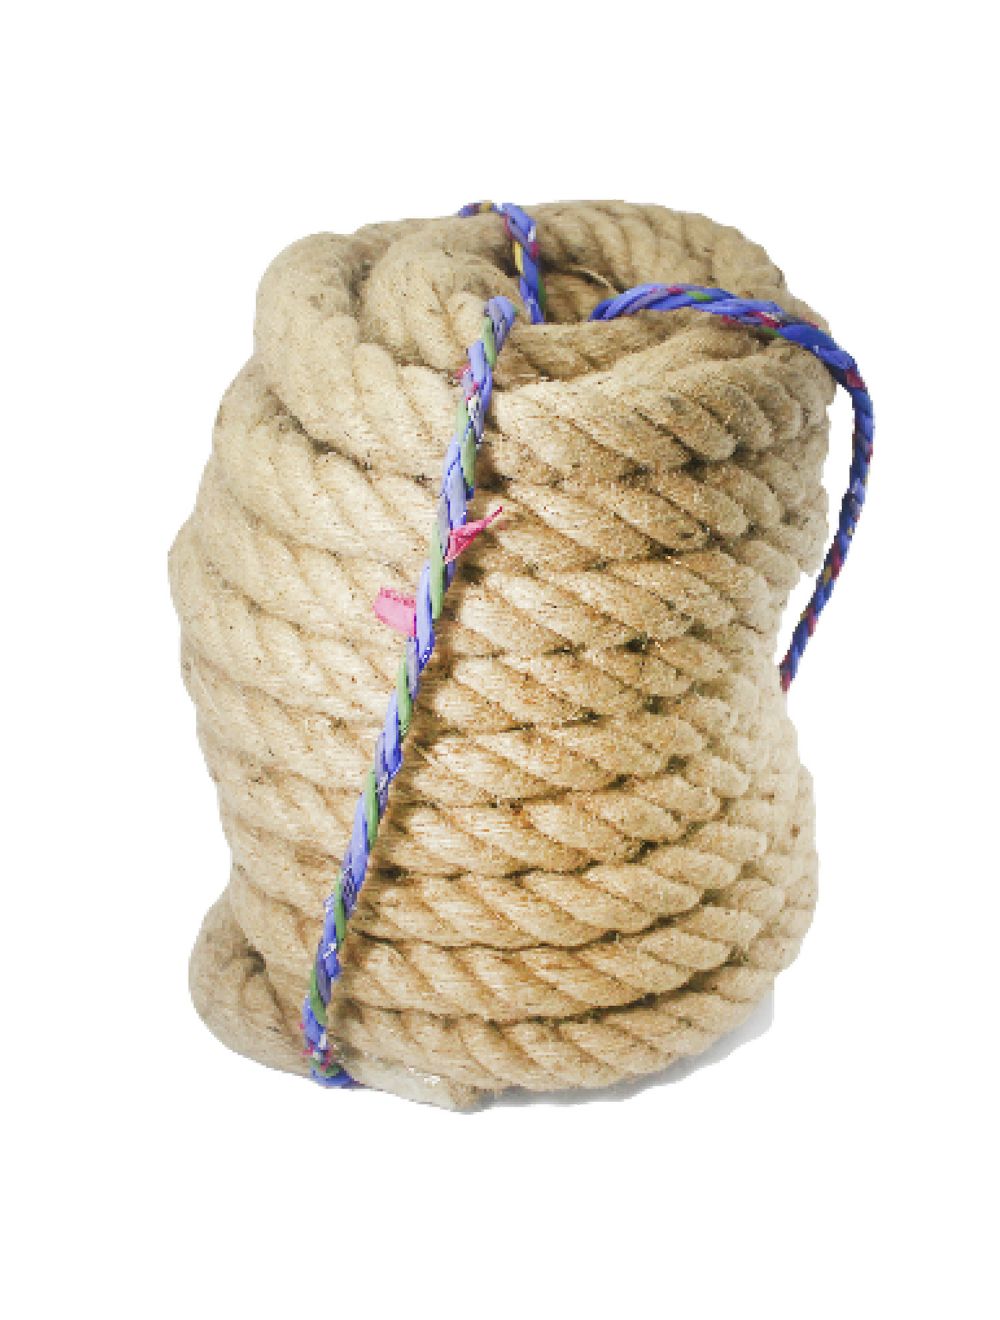 Natural 10mm 10M Strong Hemp Rope Thick Jute String Craft Twine